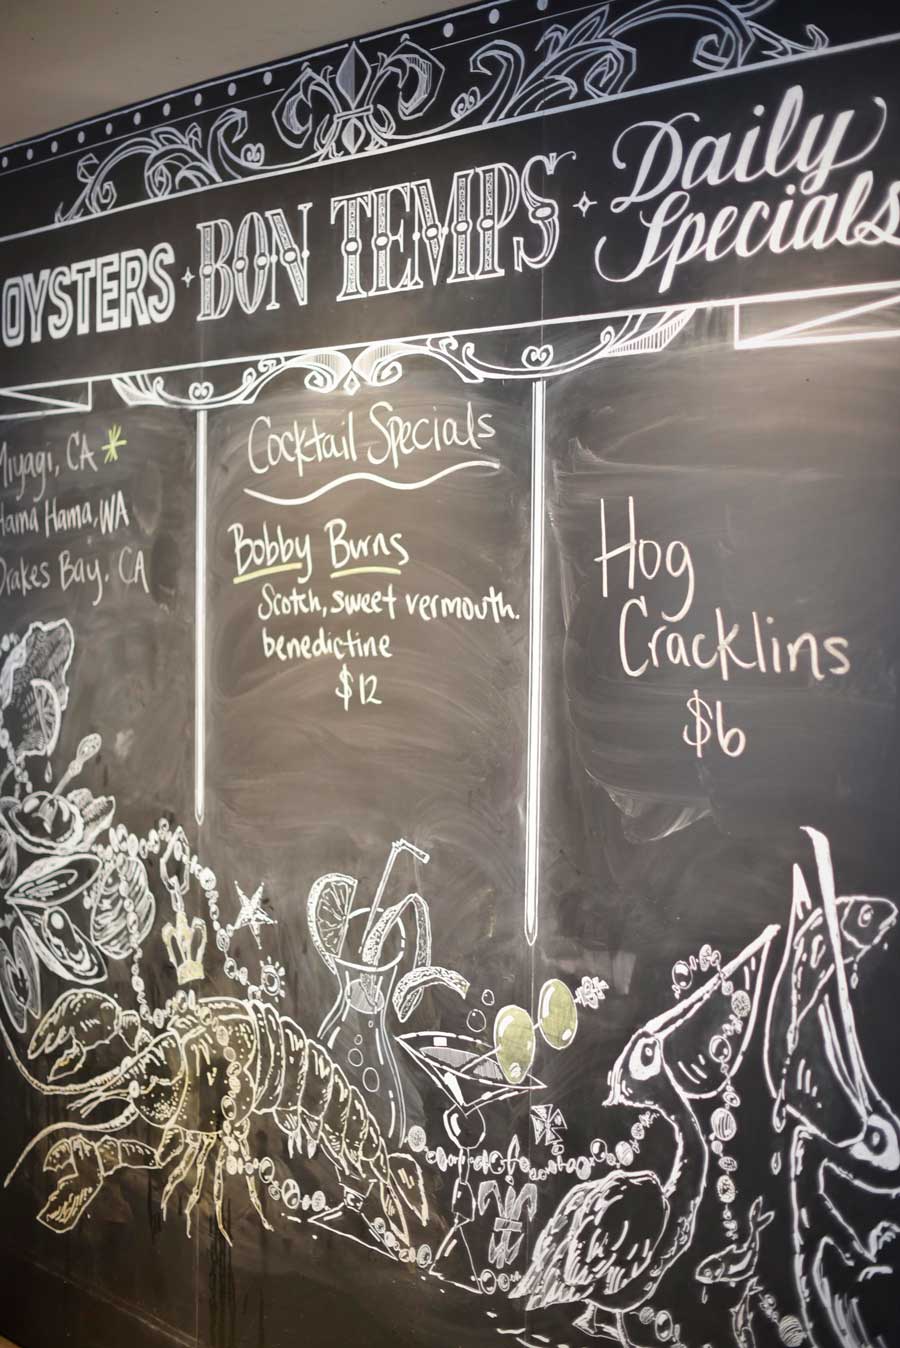 The black chalkboard menu at Boxing Room lists the daily specials